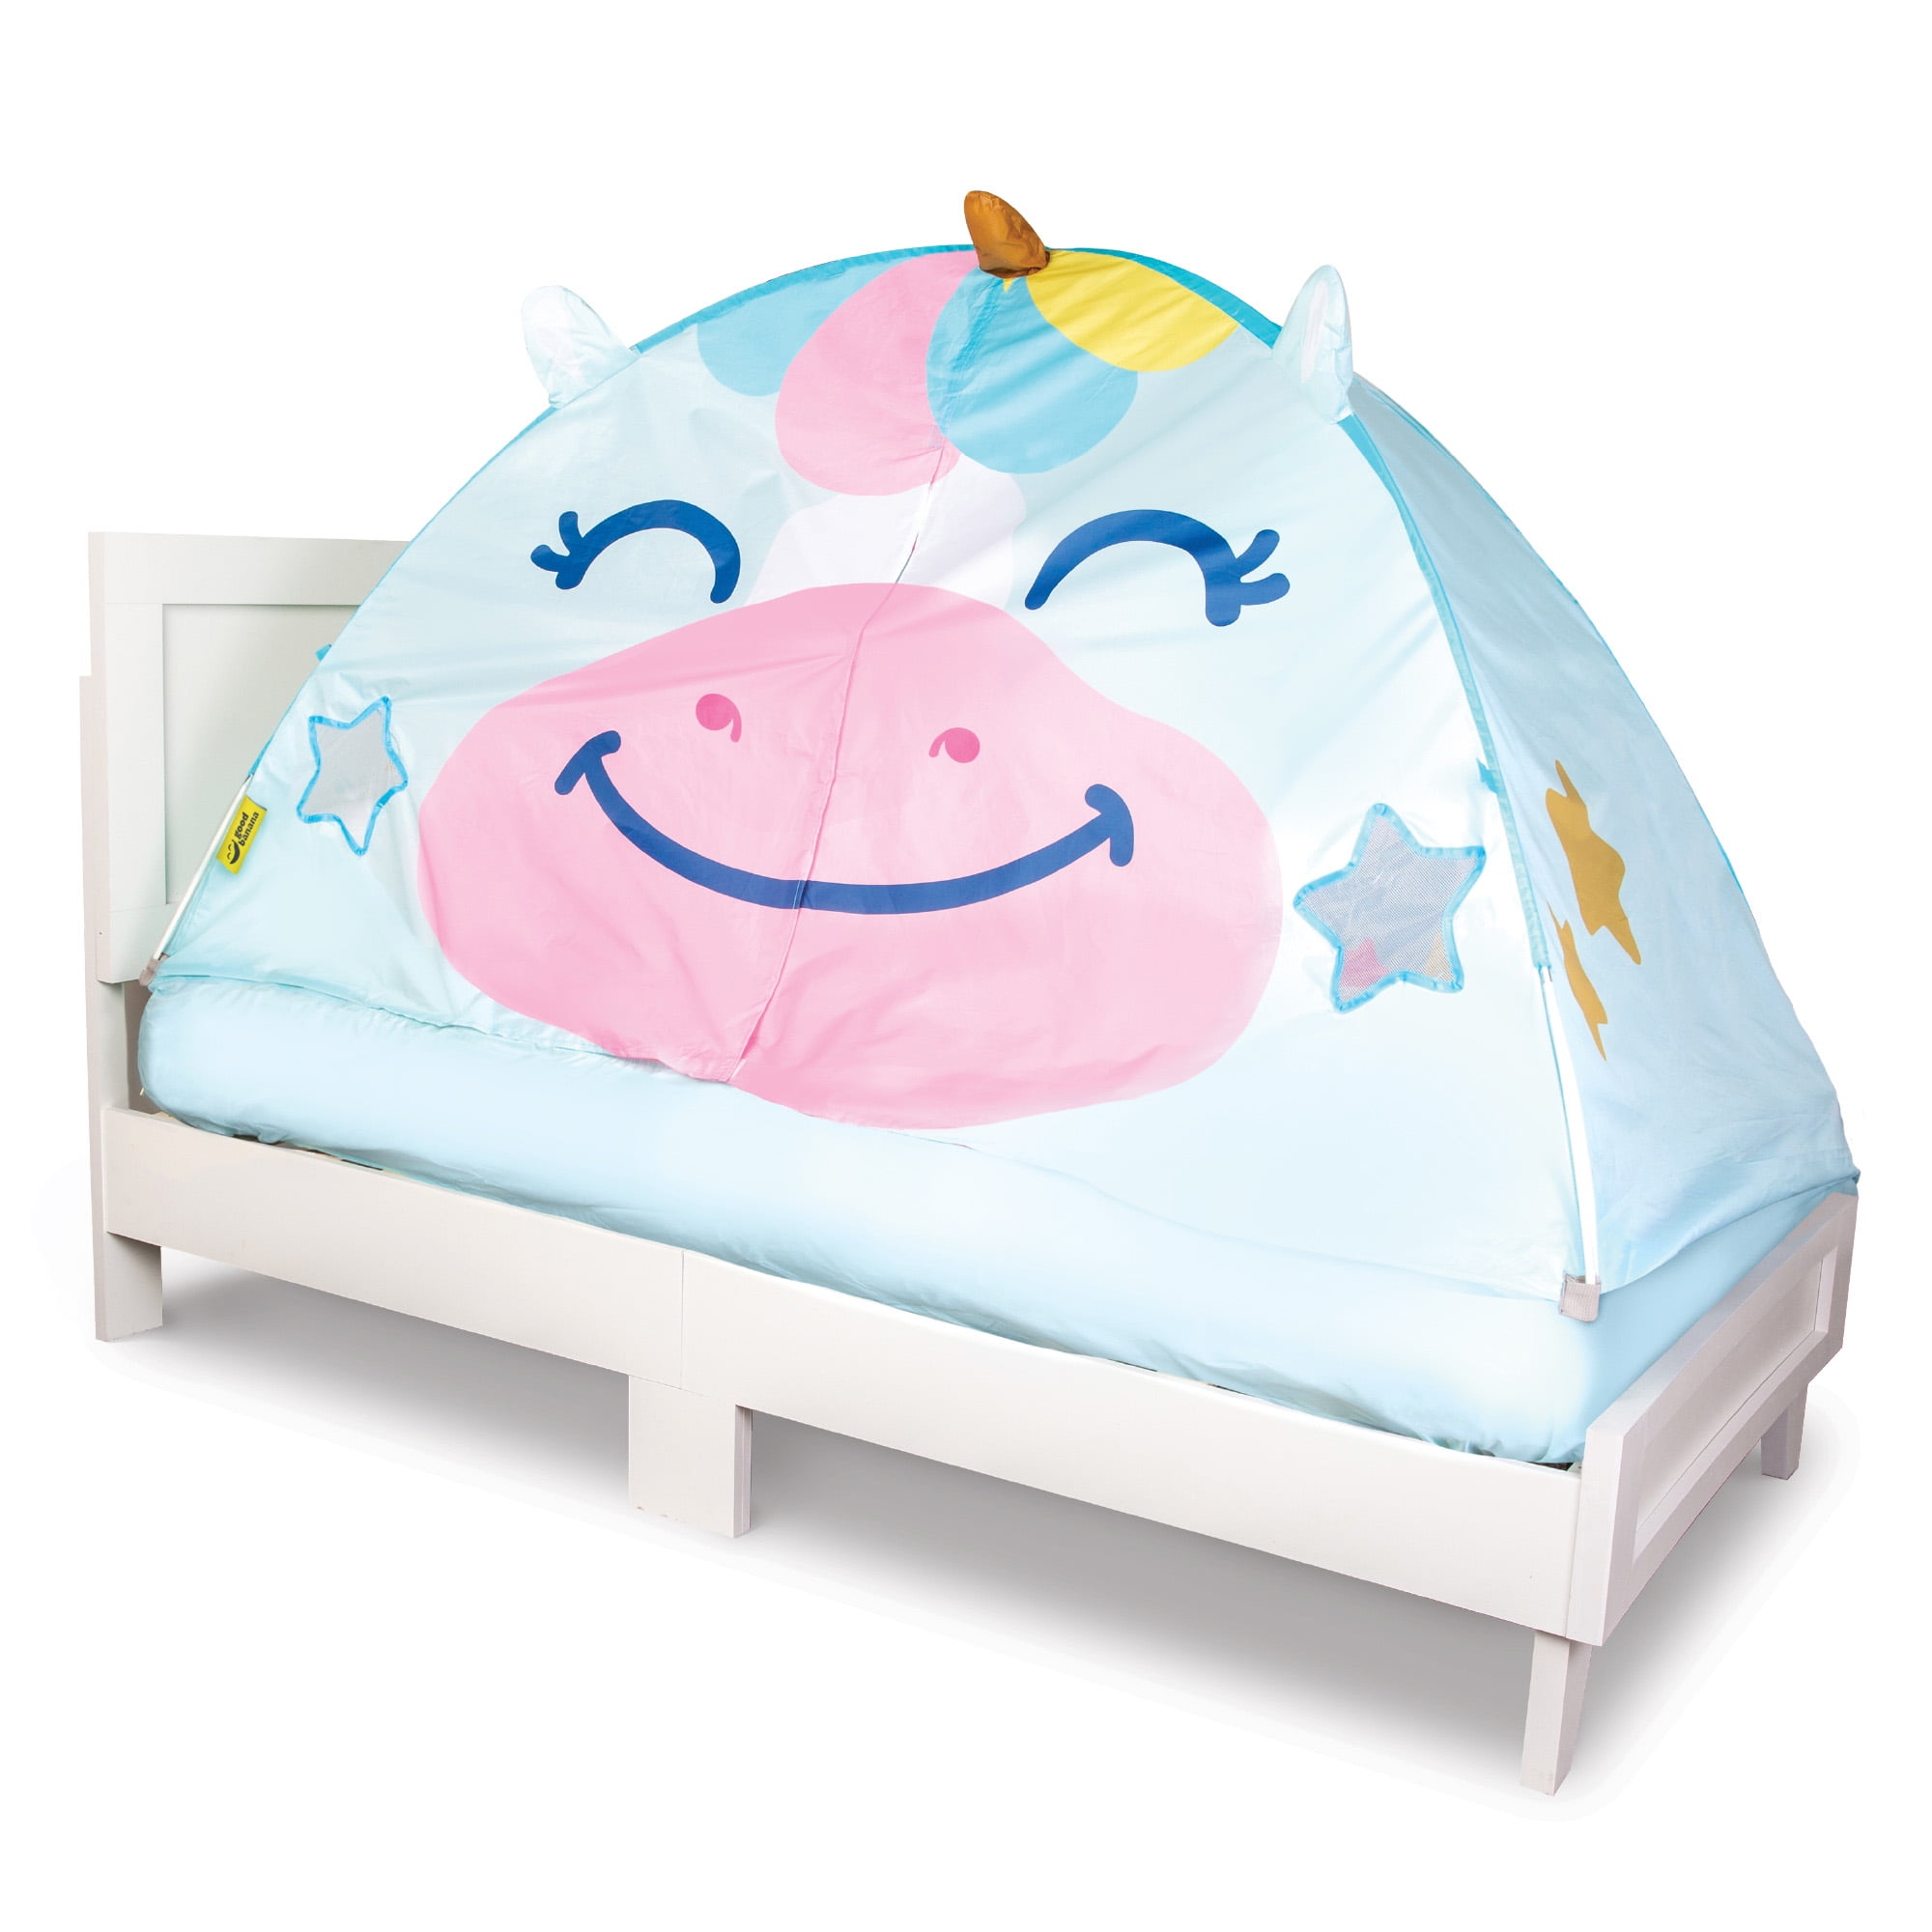 Stimulates Imagination Easy Set-Up 42” x 36” x 76” GOOD BANANA Kids’ Unicorn Bed Tent for Twin Beds Promotes Independent Play Magical Play Fort Ventilated Indoor Play Tent Hugs Mattress Firmly 